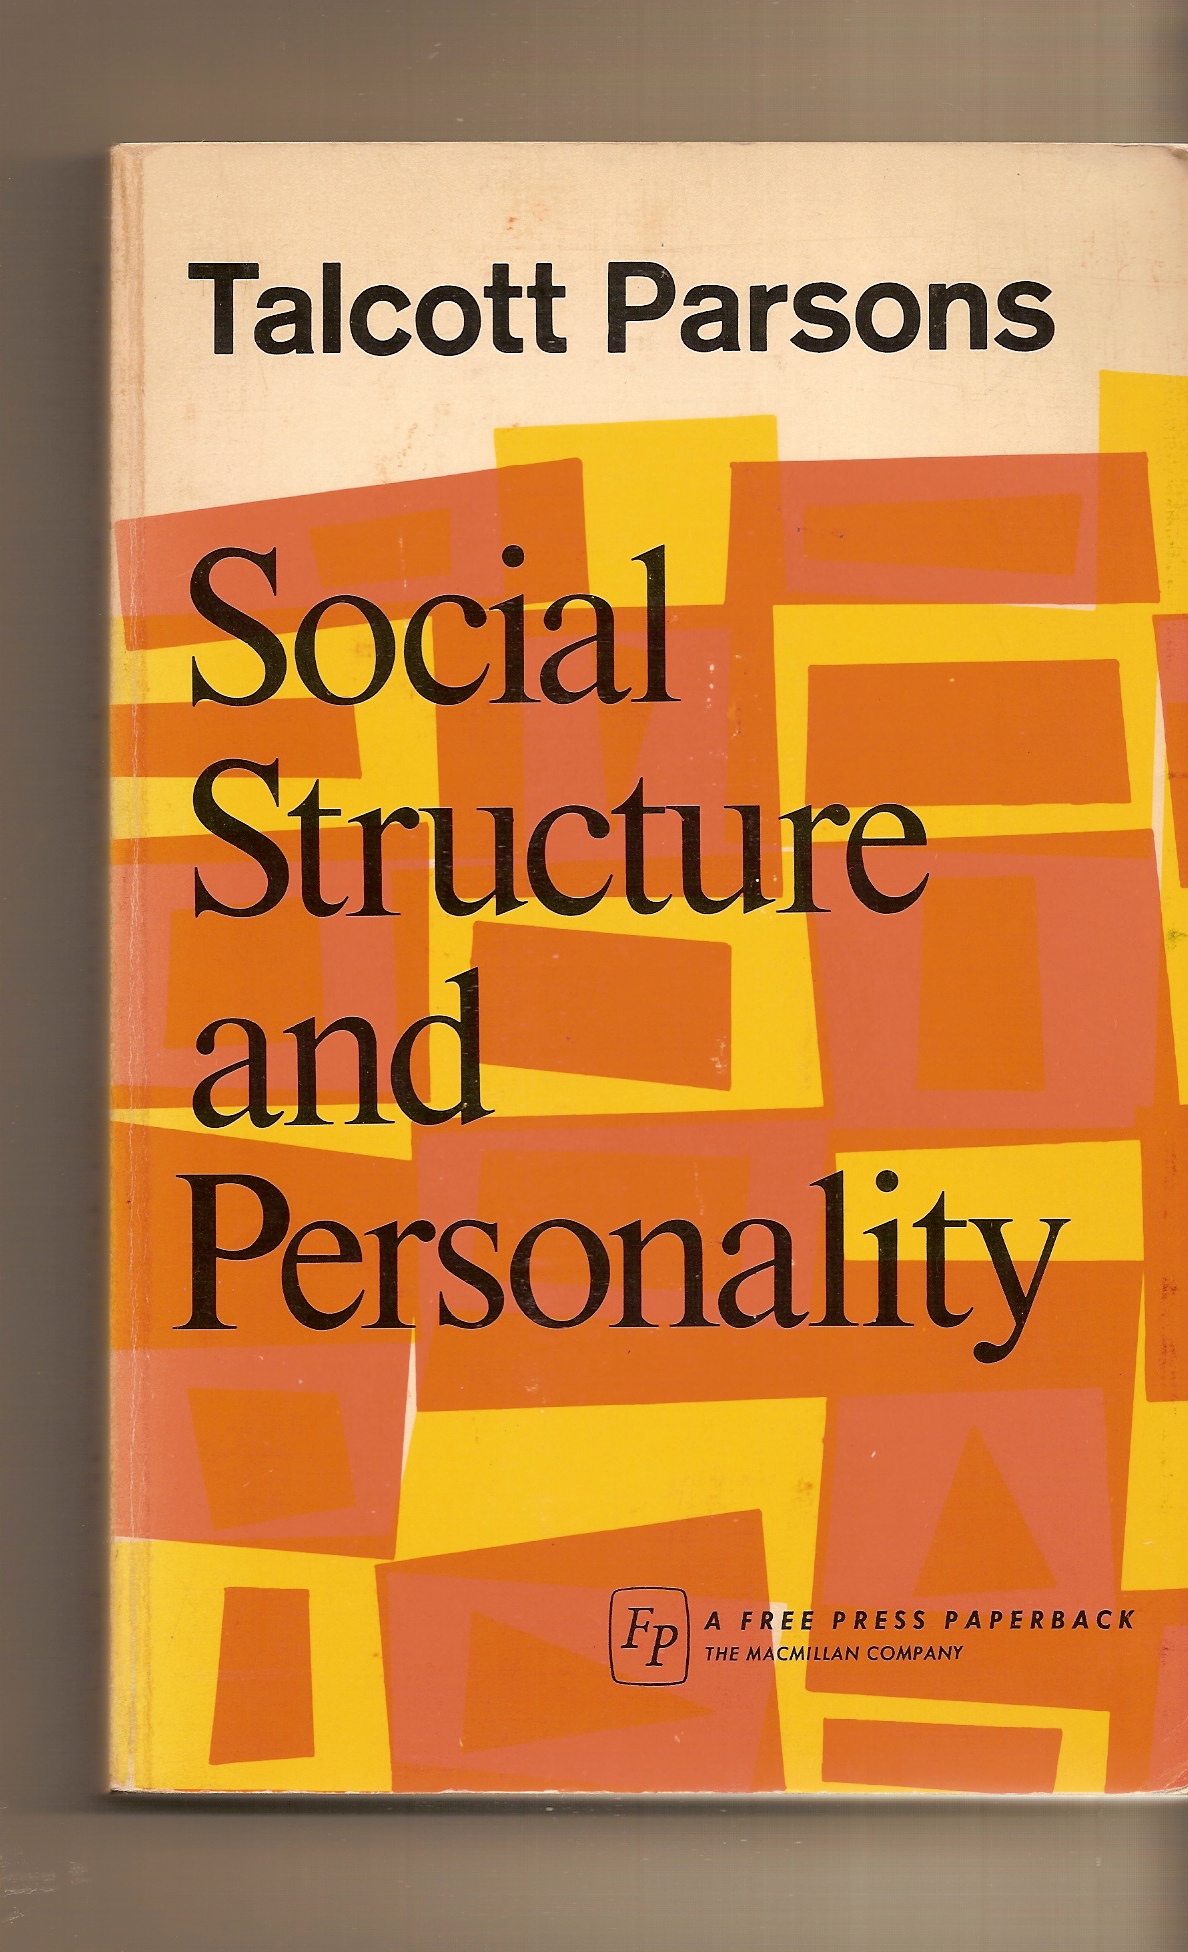 PARSONS TALCOTT - Social Structure and Personality